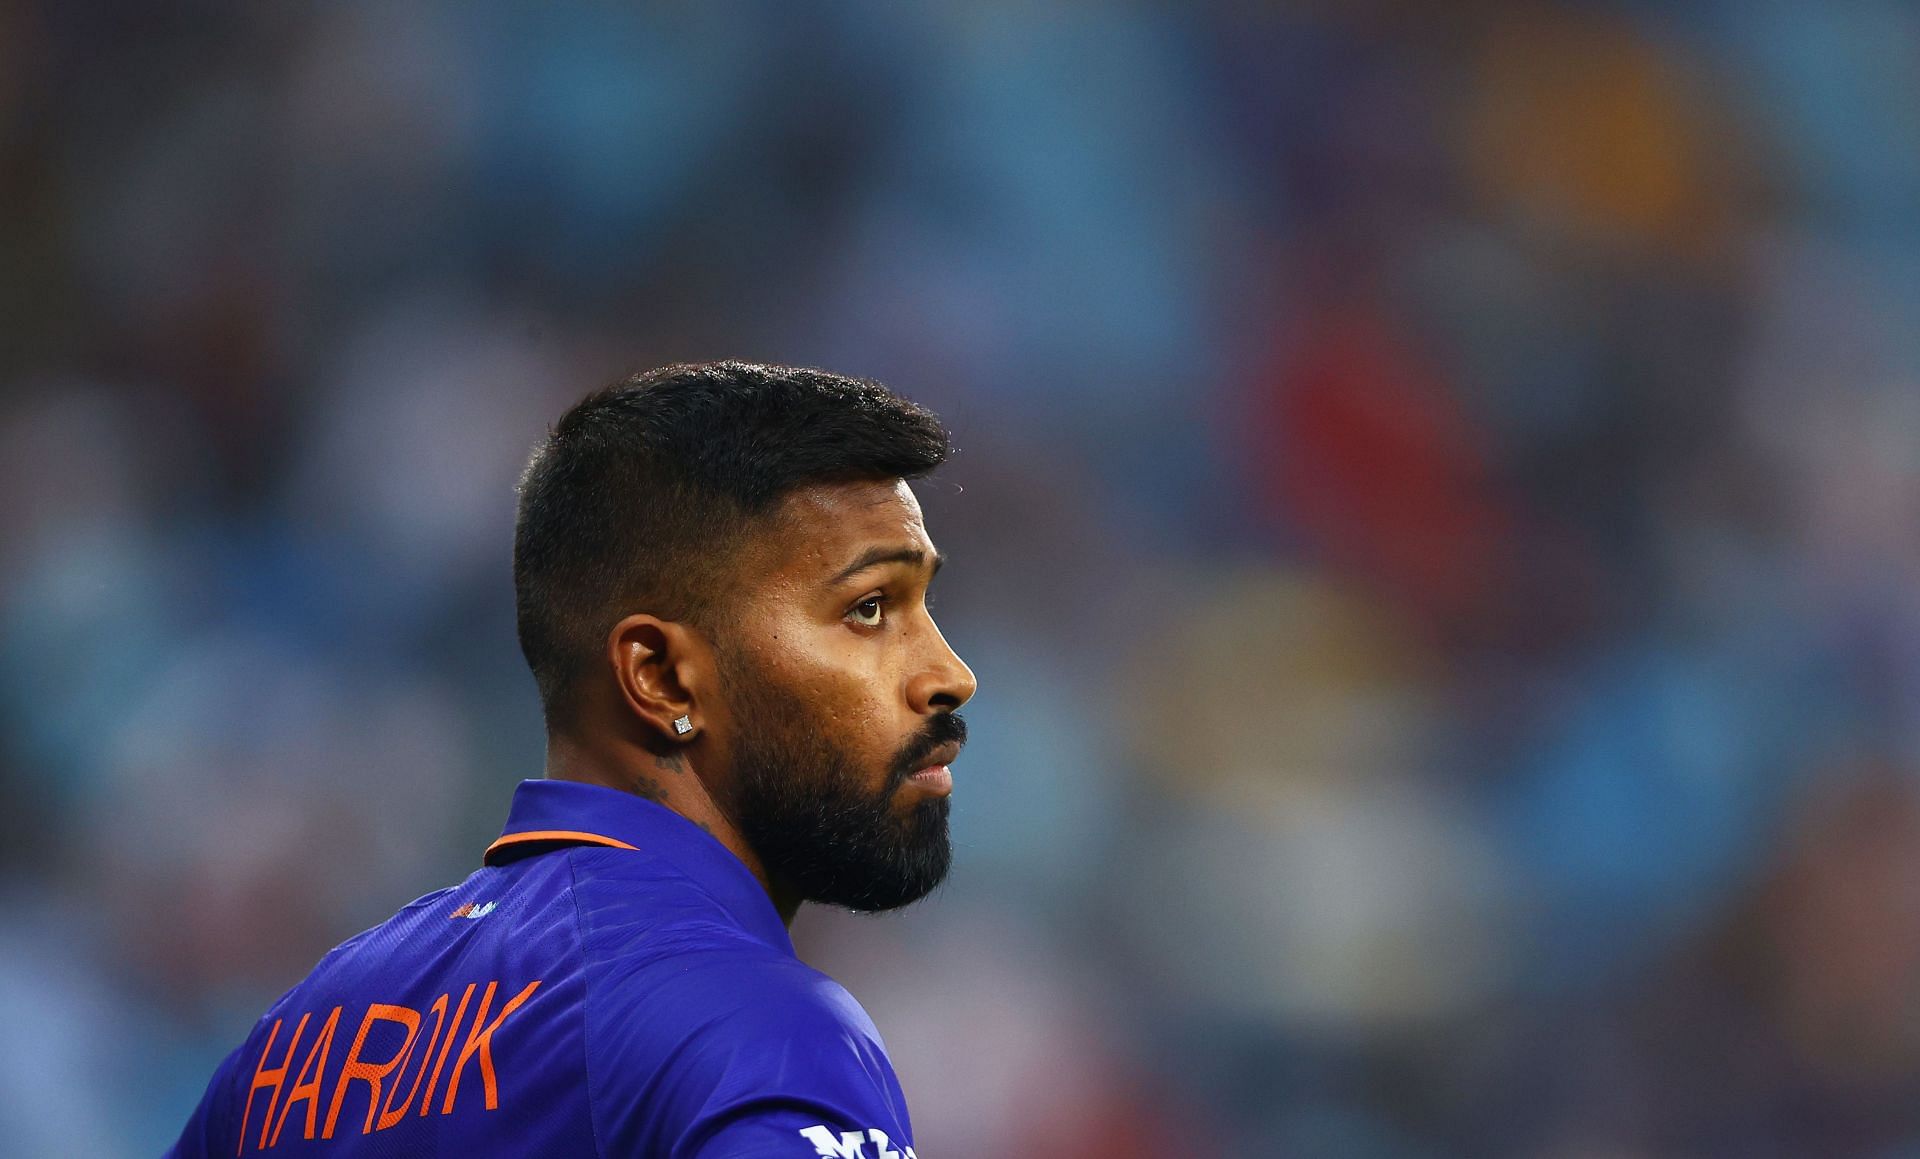 India vs South Africa 2022: Hardik Pandya on his preparations for T20 World Cup 2022